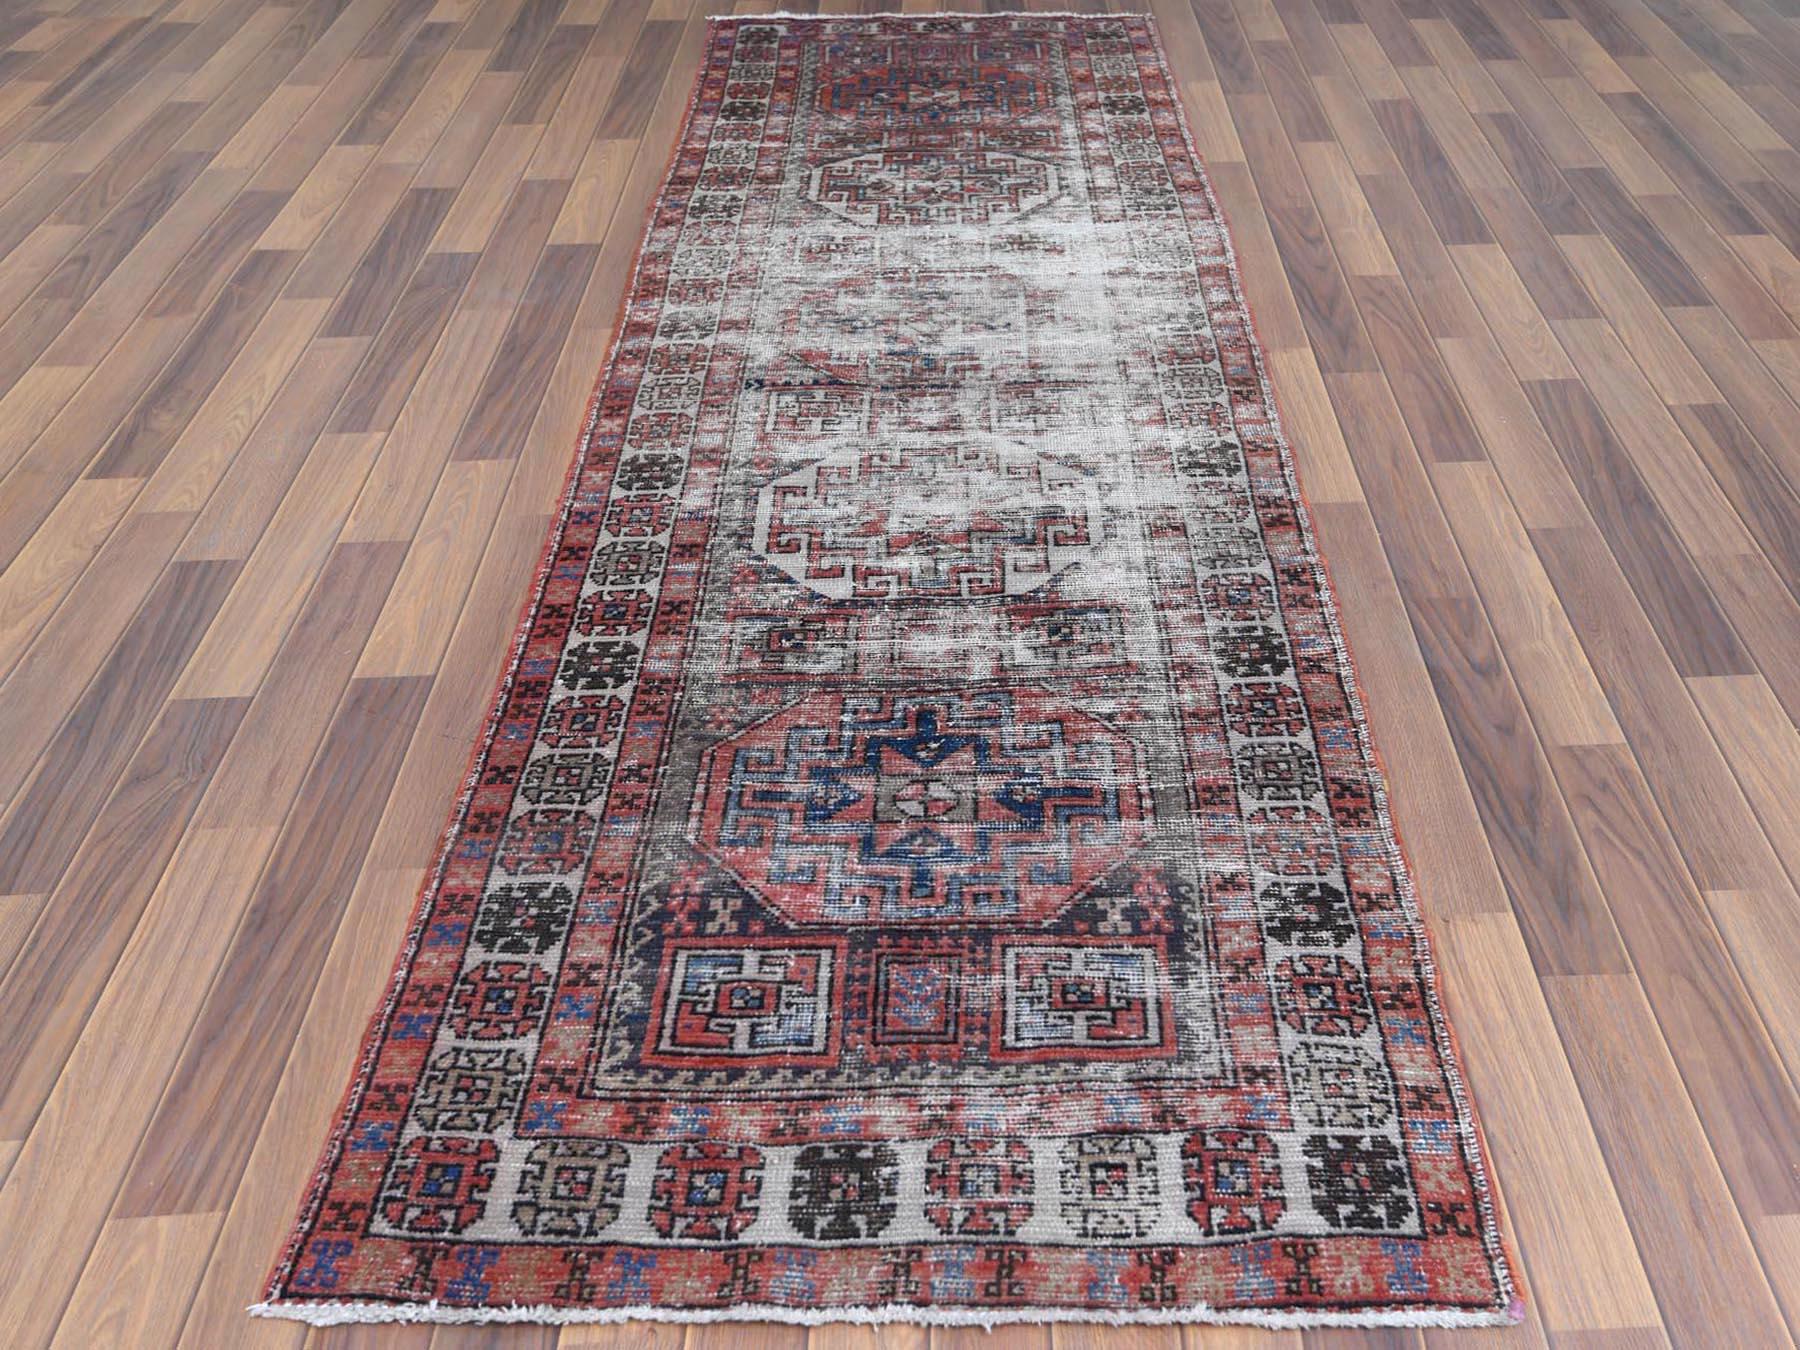 This fabulous hand-knotted carpet has been created and designed for extra strength and durability. This rug has been handcrafted for weeks in the traditional method that is used to make
Exact rug size in feet and inches: 3'2